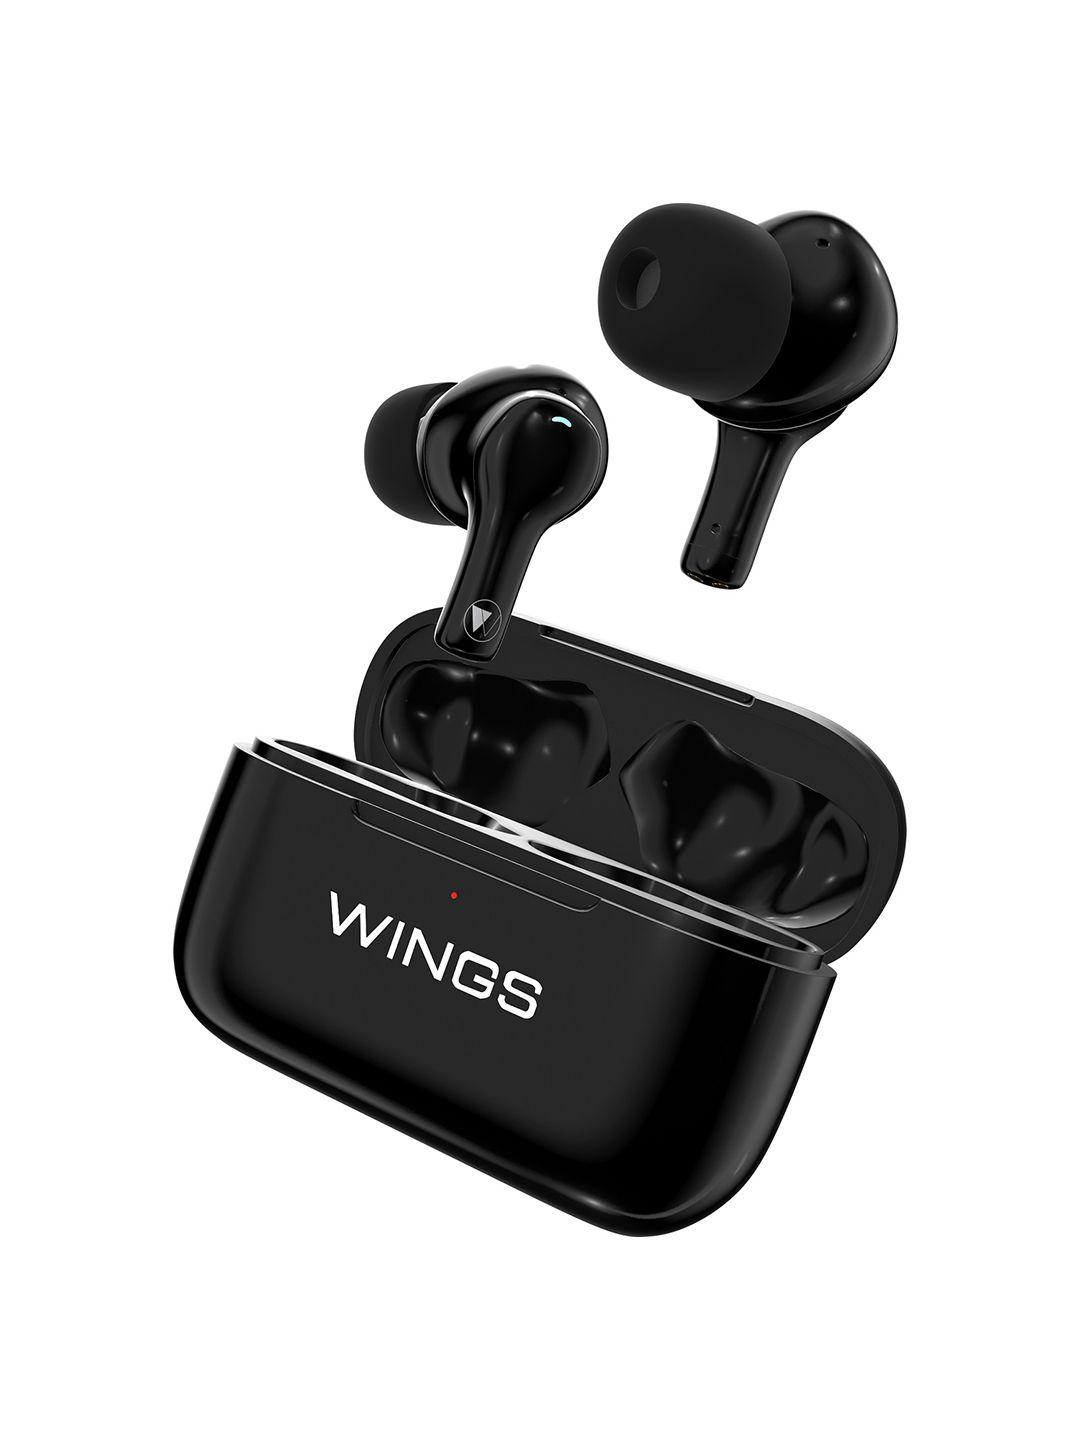 WINGS Bassdrops 100 with Active Noise Cancellation Bluetooth Headset - Black